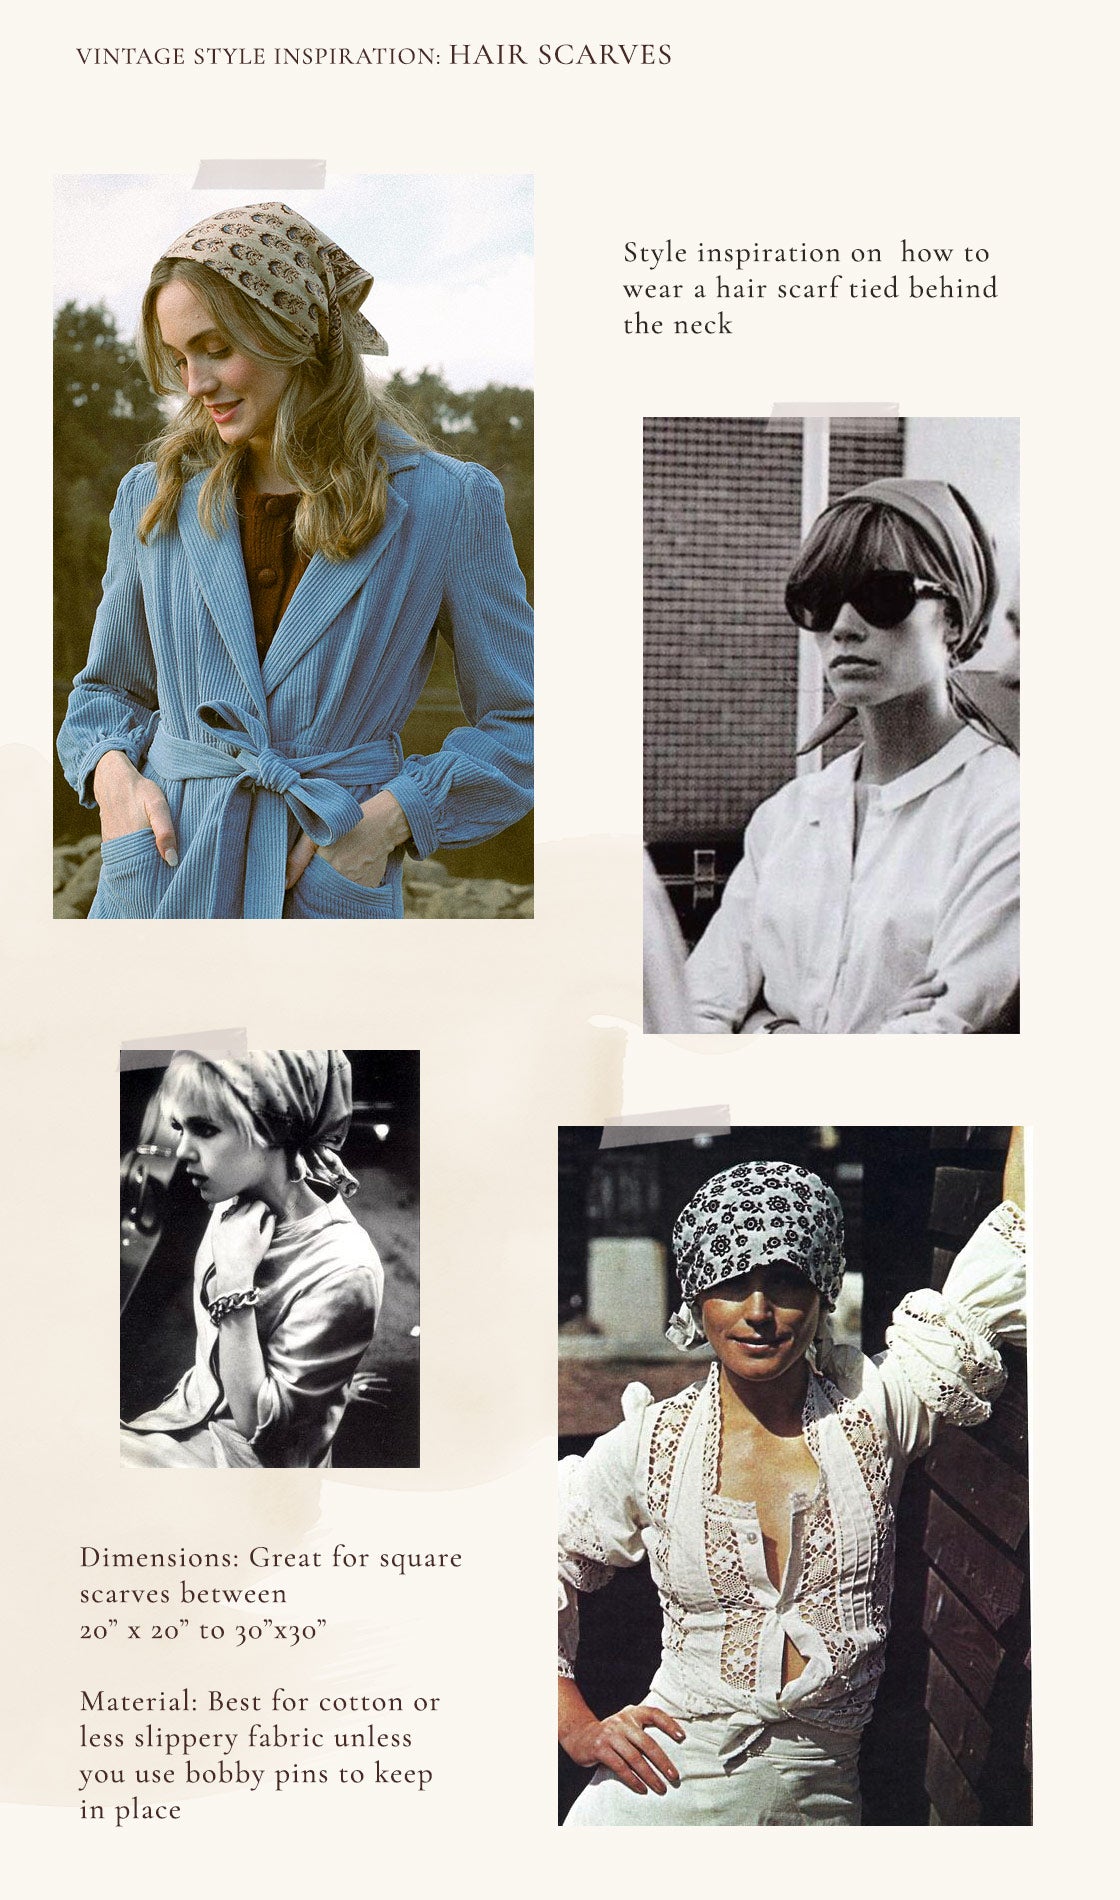 Vintage Style Inspiration: How to wear a hair scarf